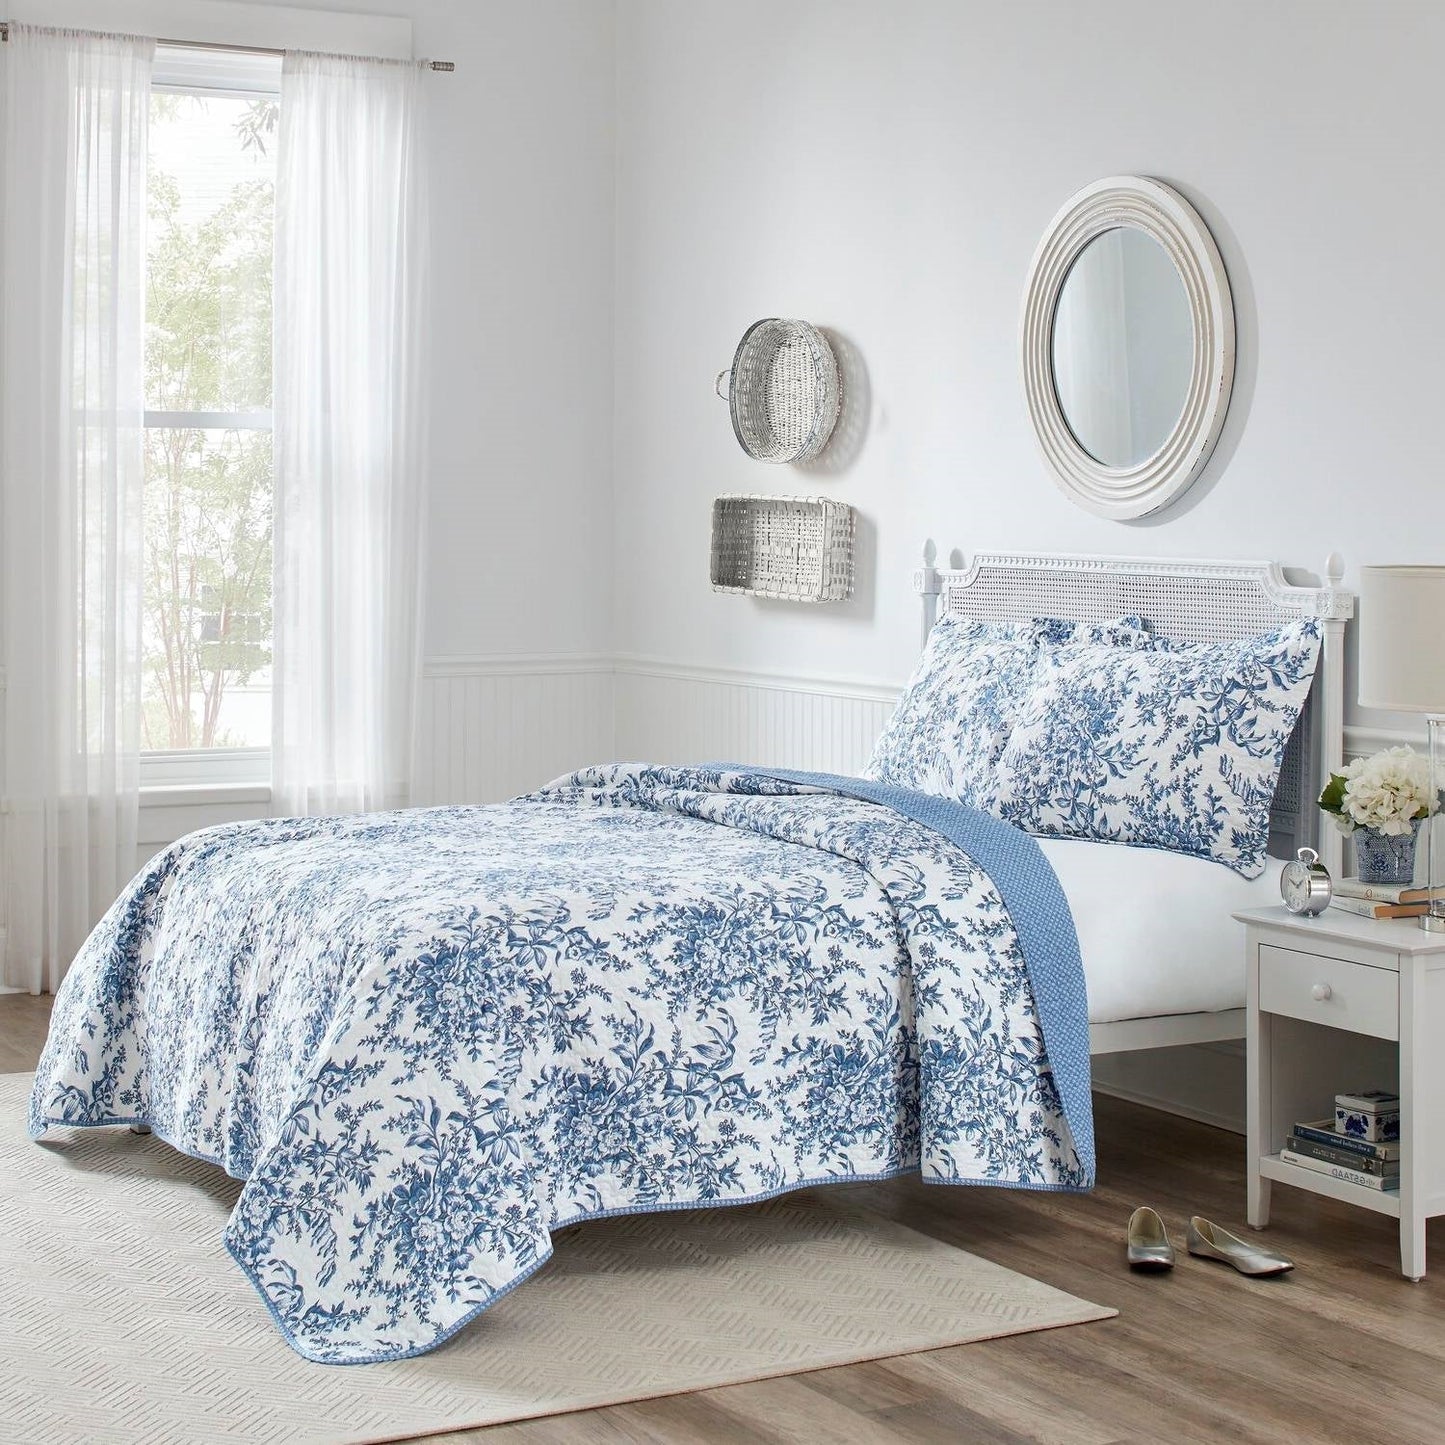 Bathroom > Laundry Hampers - Full/Queen 3 Piece Bed In A Bag Reversible Blue White Floral Cotton Quilt Set